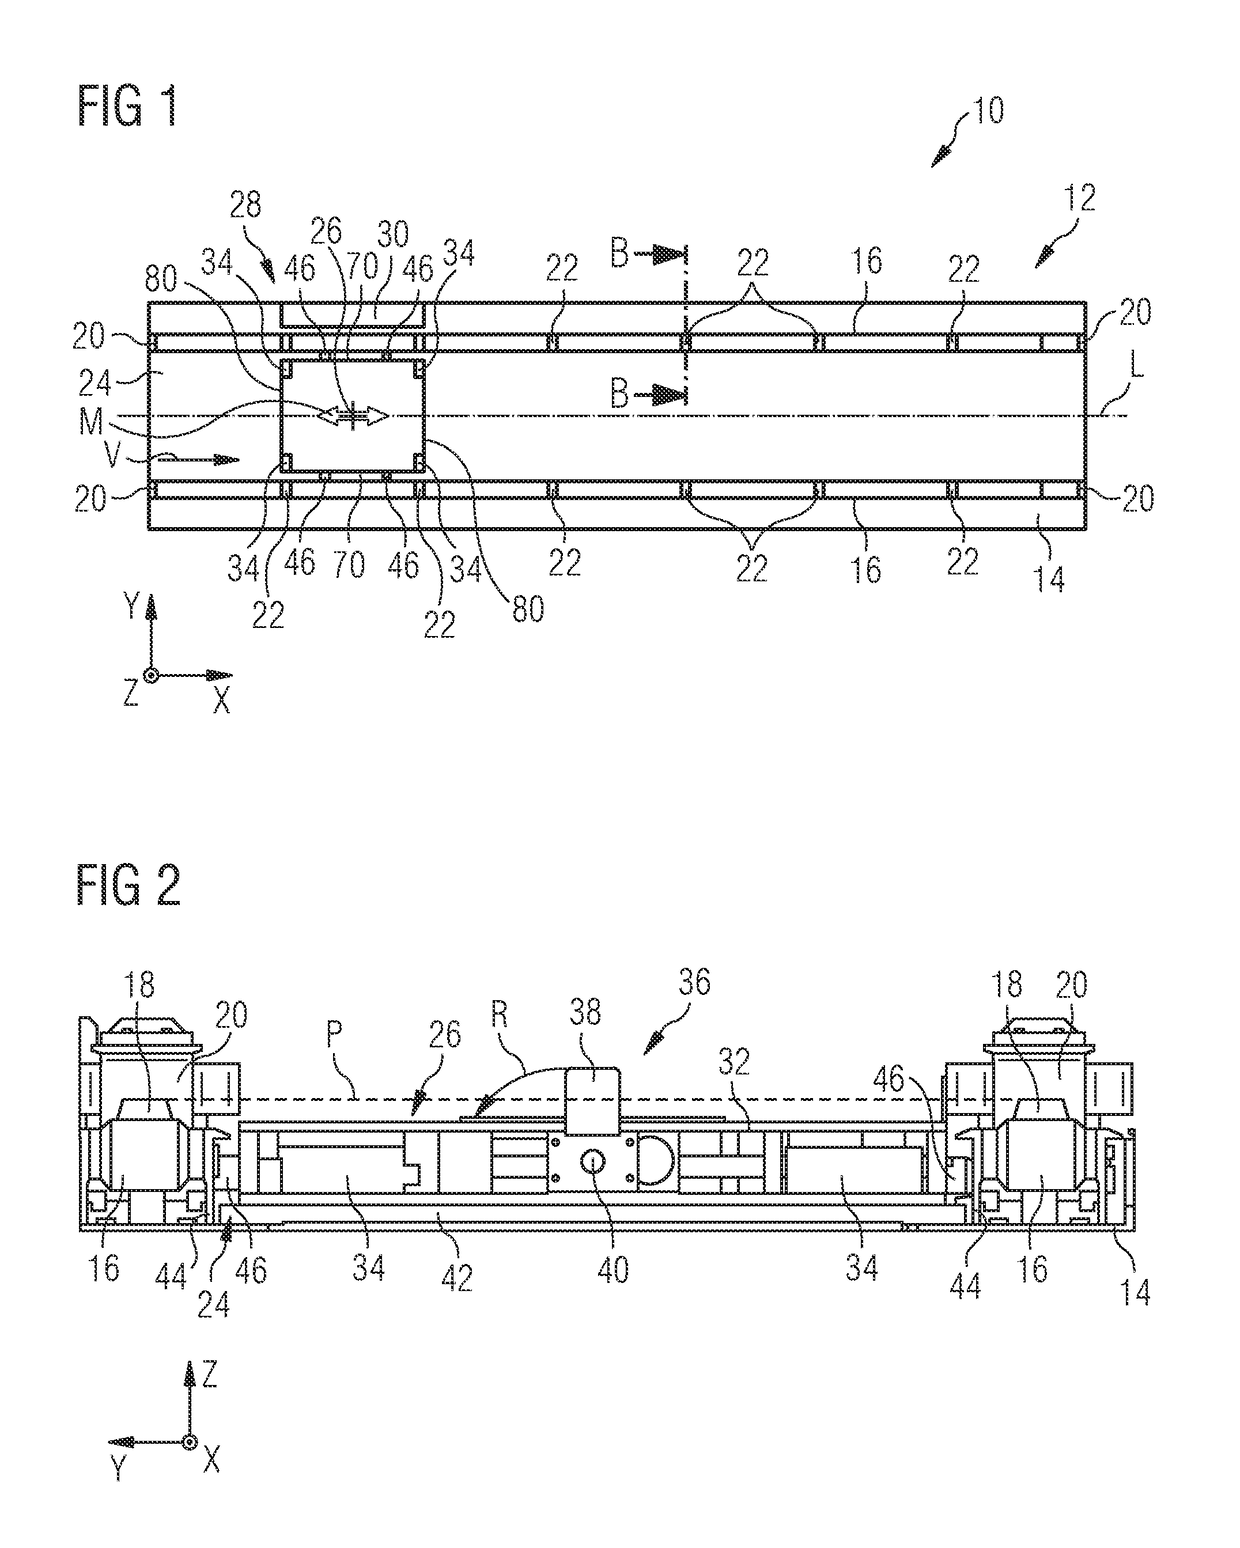 System for moving loads comprising a locking arrangement that is operable by means of a transport vehicle